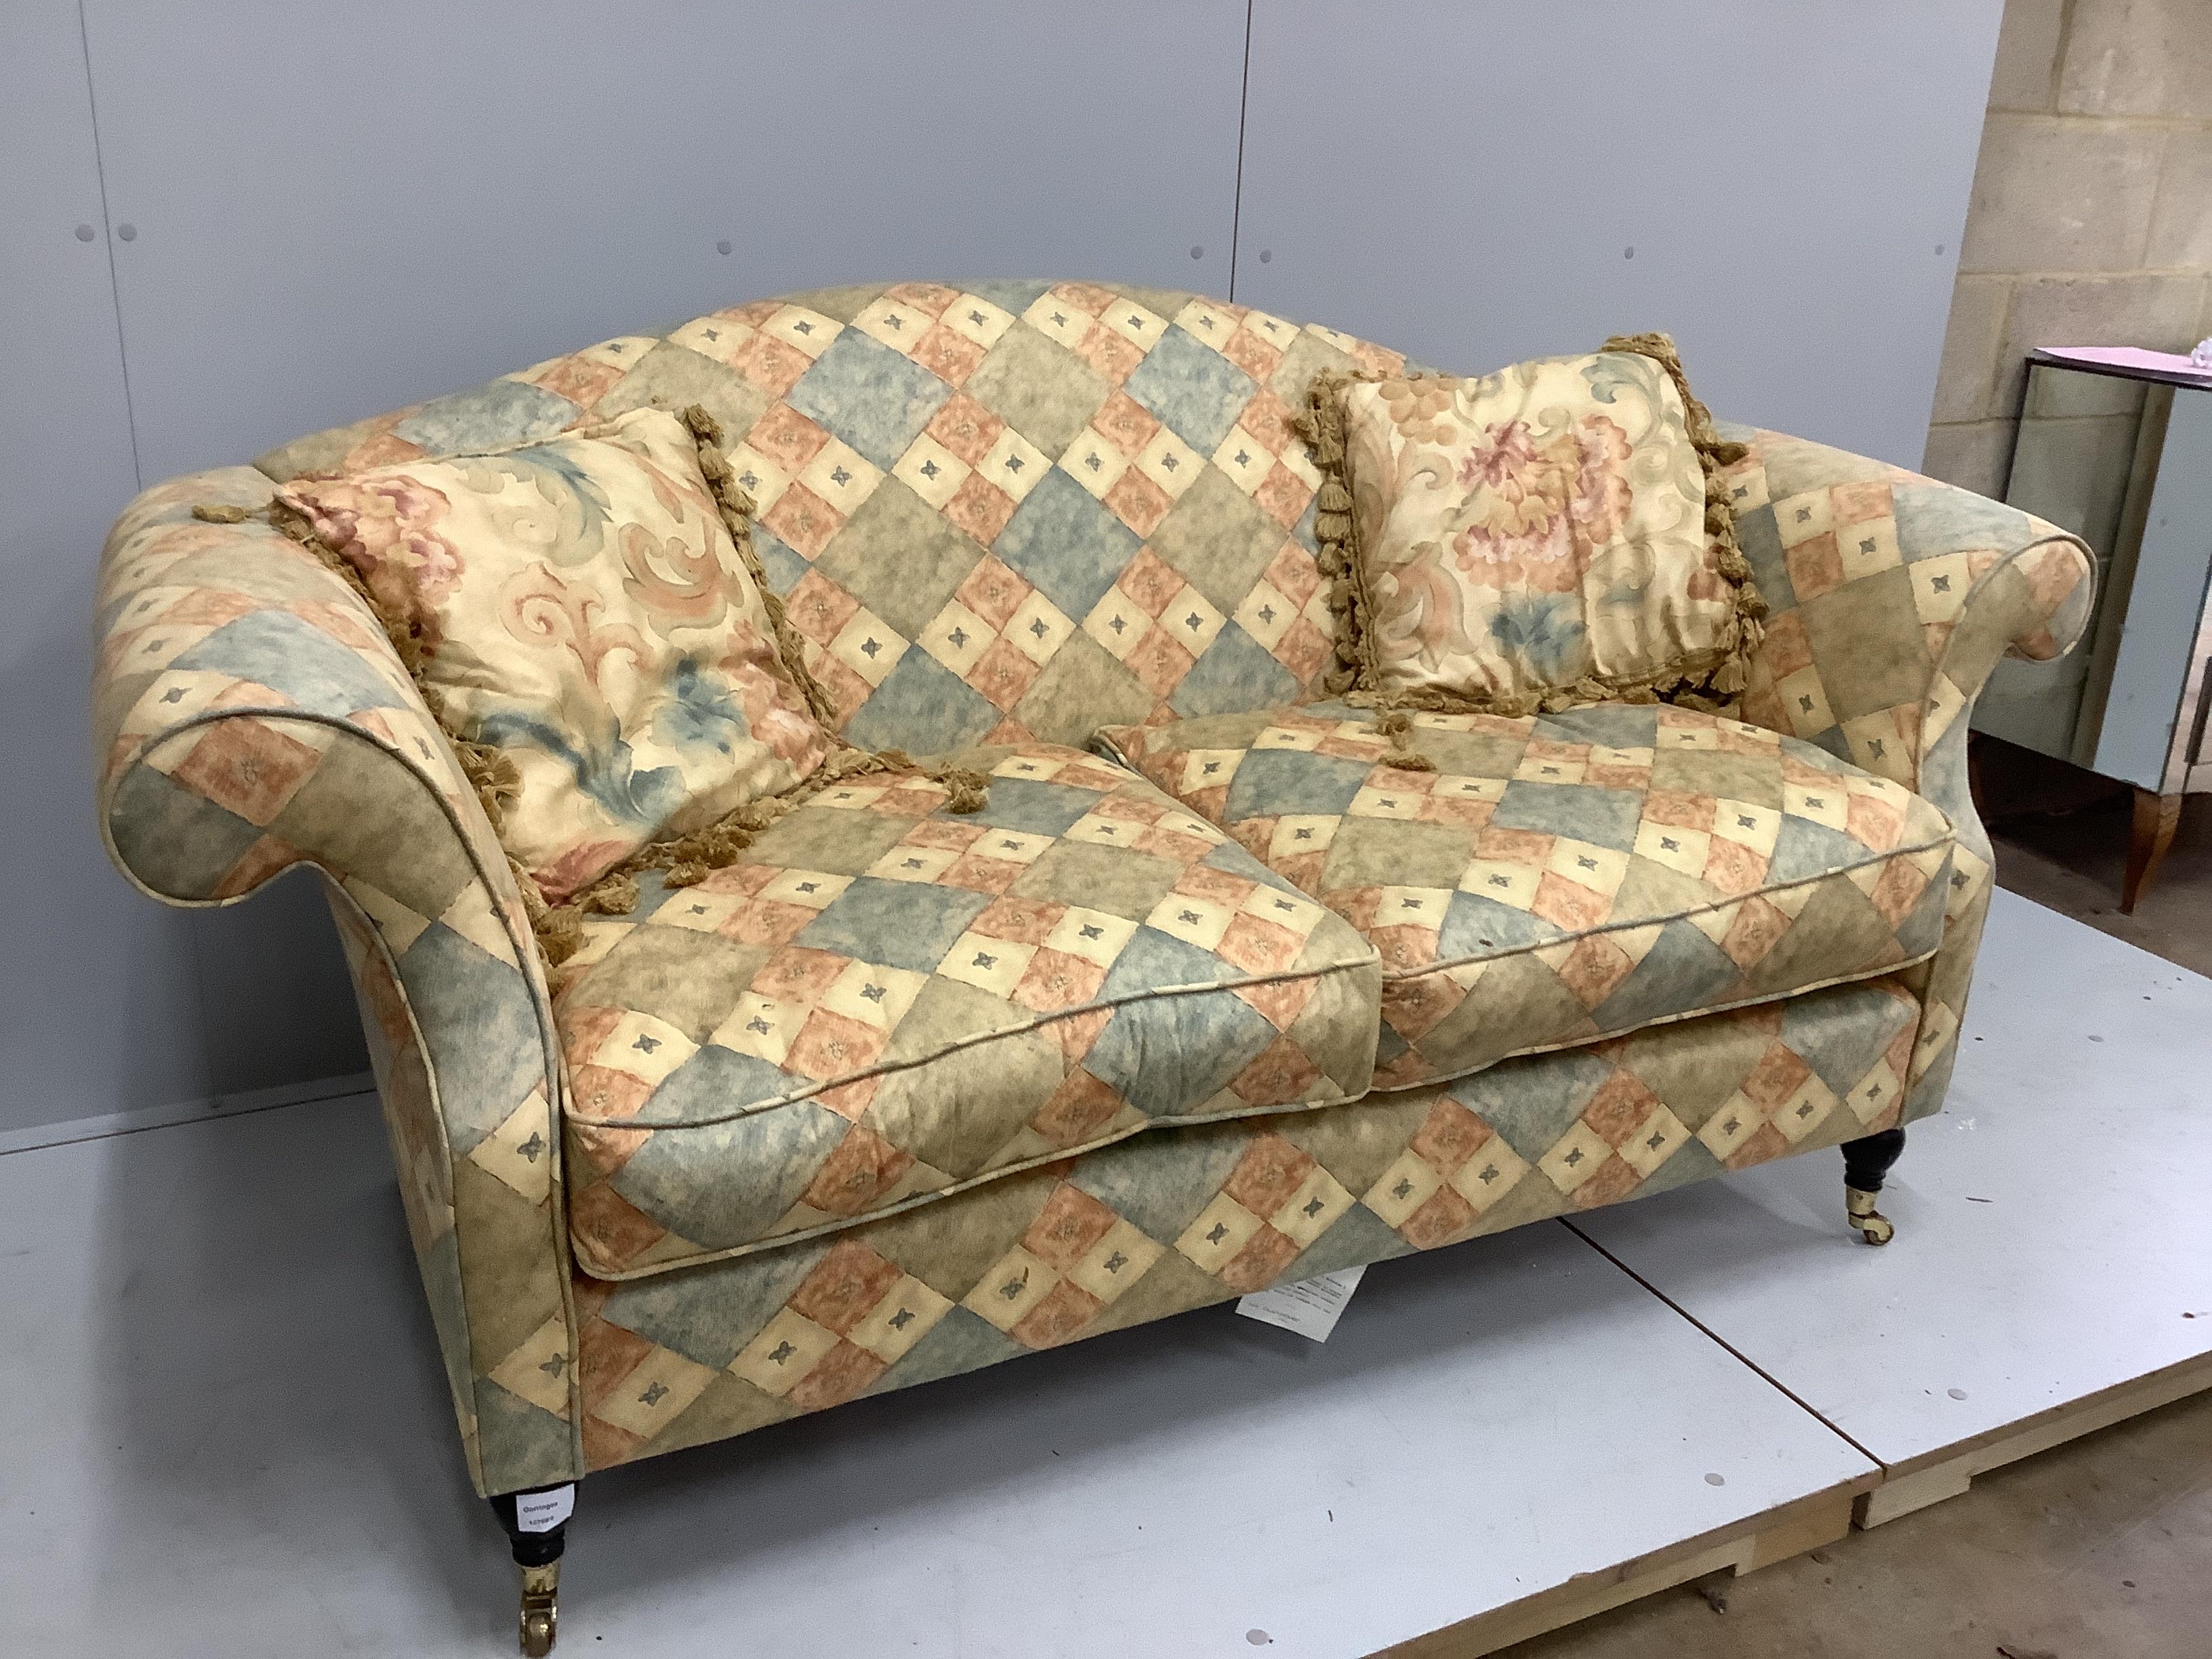 A Victorian style scroll arm two seater settee, width 170cm, depth 74cm, height 87cm